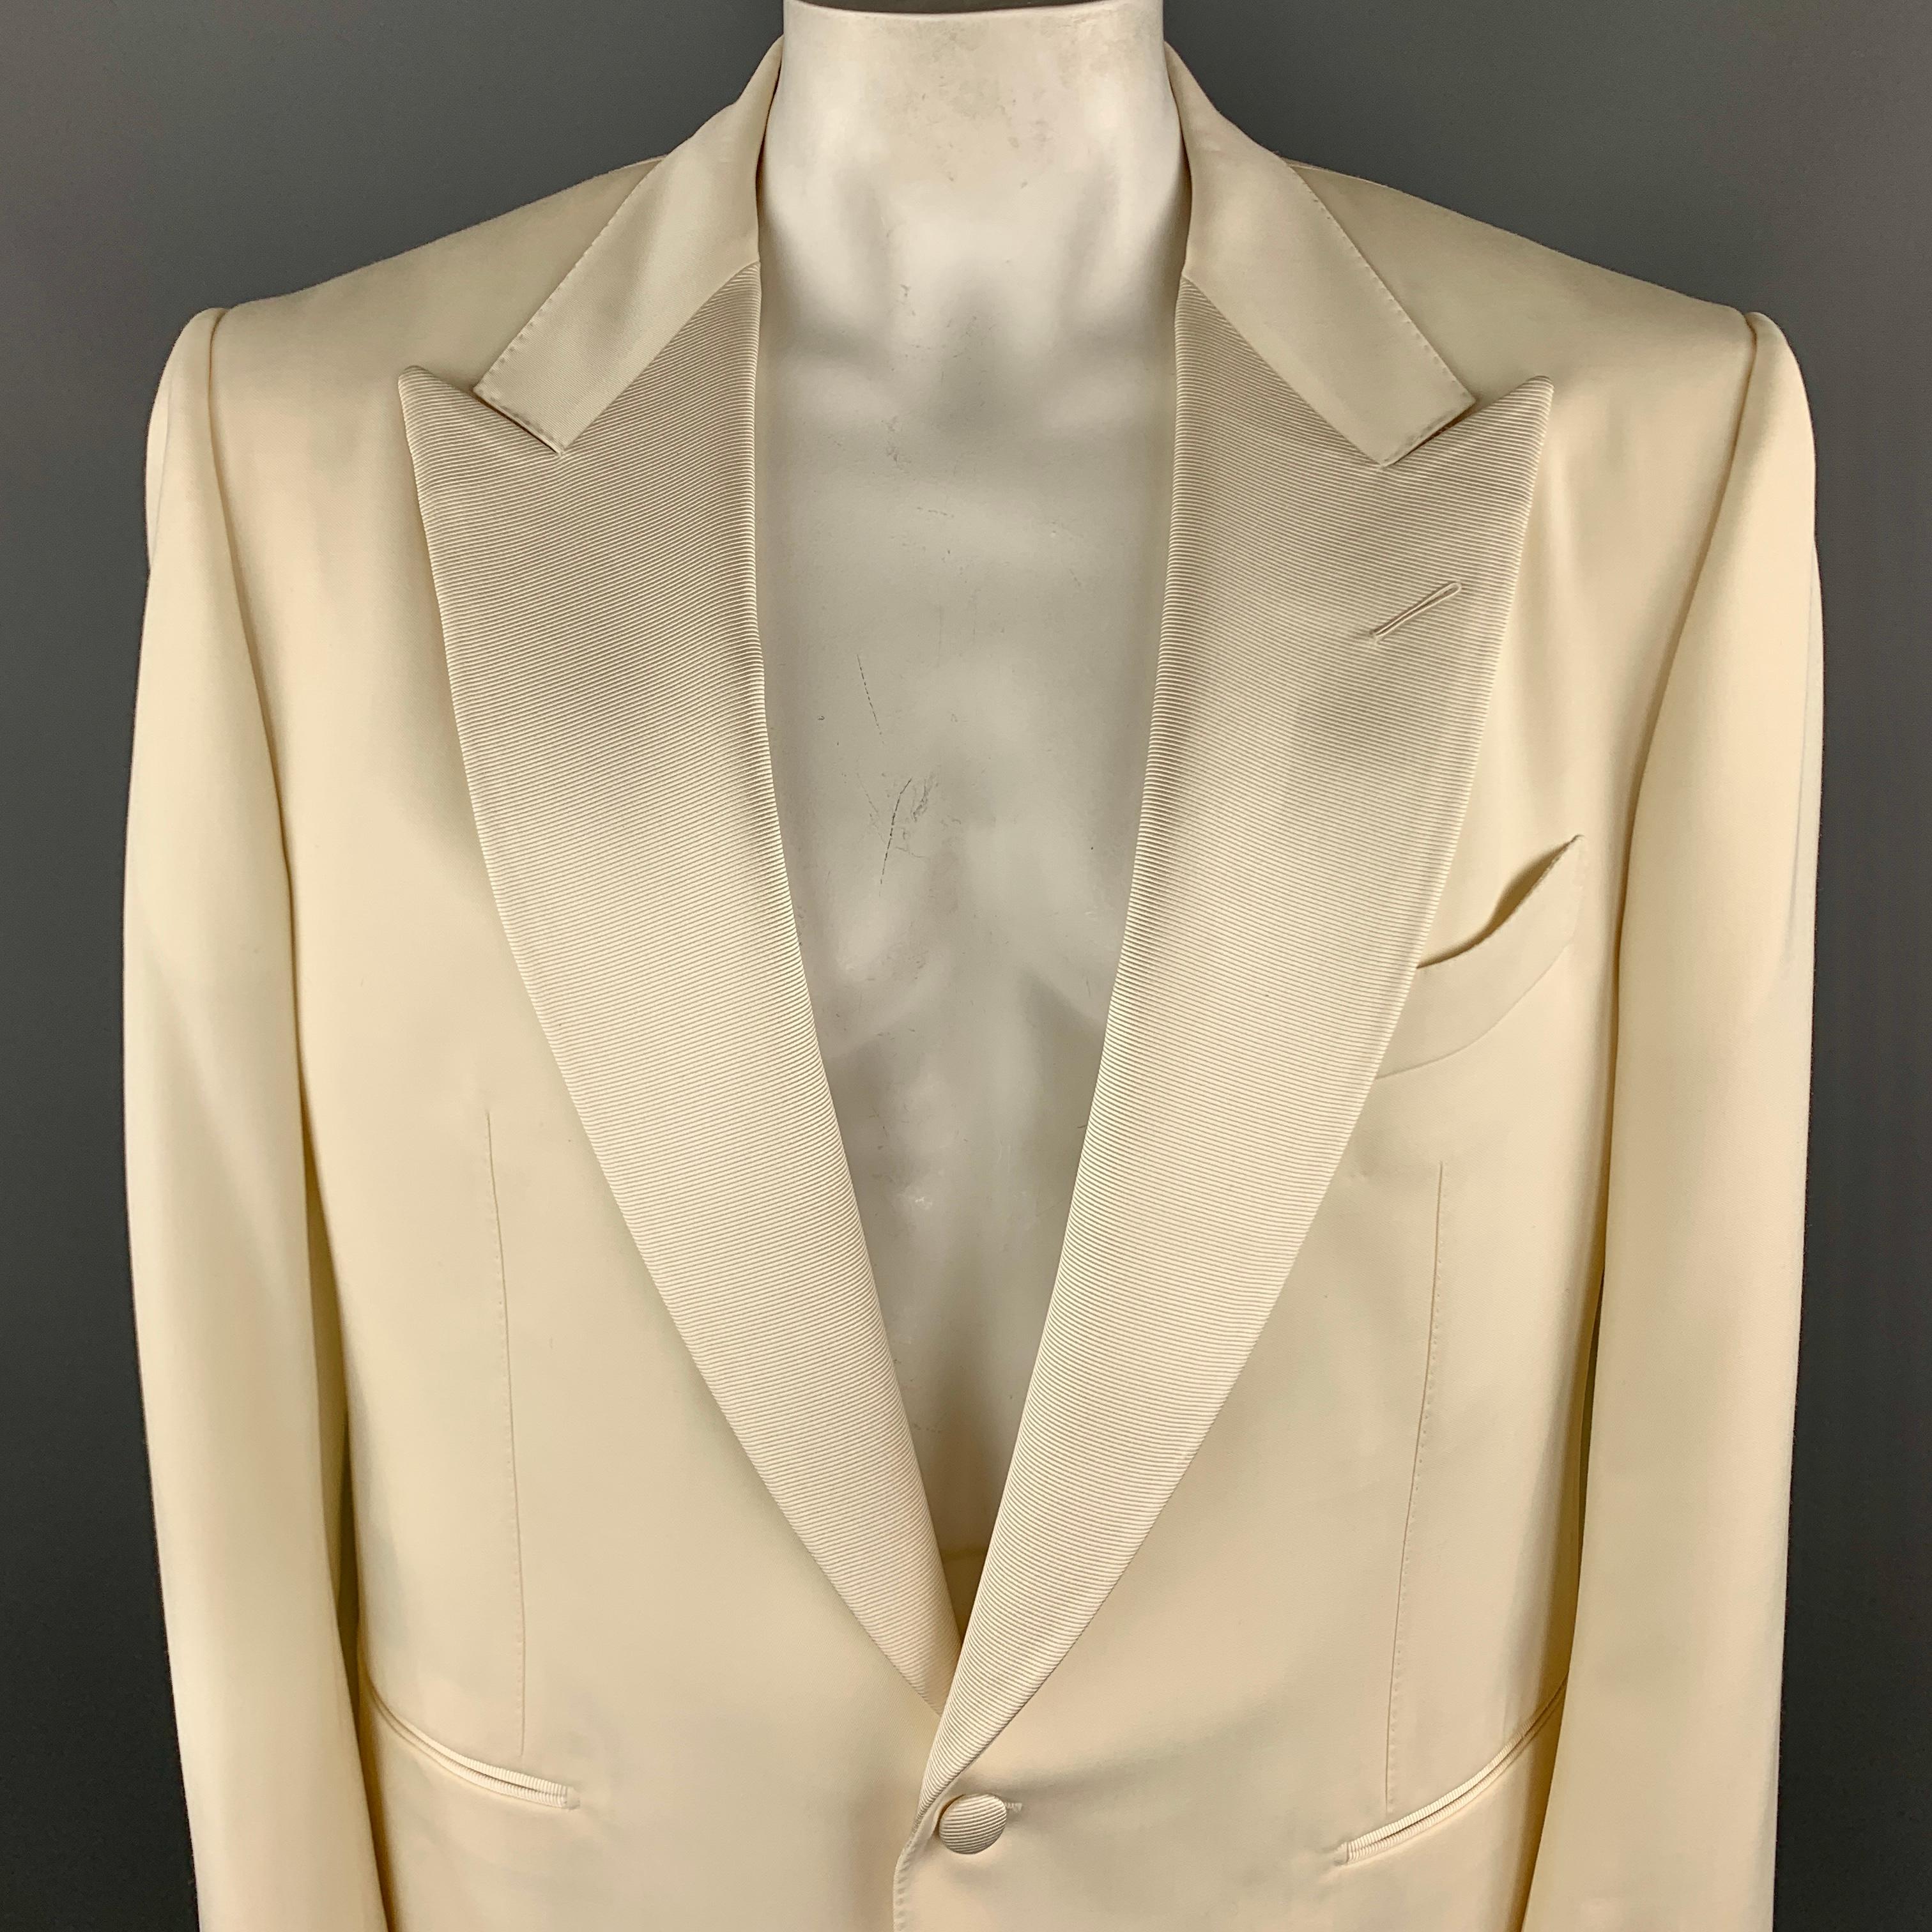 TOM FORD Sport Coat comes in a cream wool / mohair materials, with a contrast peak lapel, a single button at closure, single breasted, slit pockets, functional buttons at cuffs, and a double vent at back. Made in Italy.

Excellent Pre-Owned